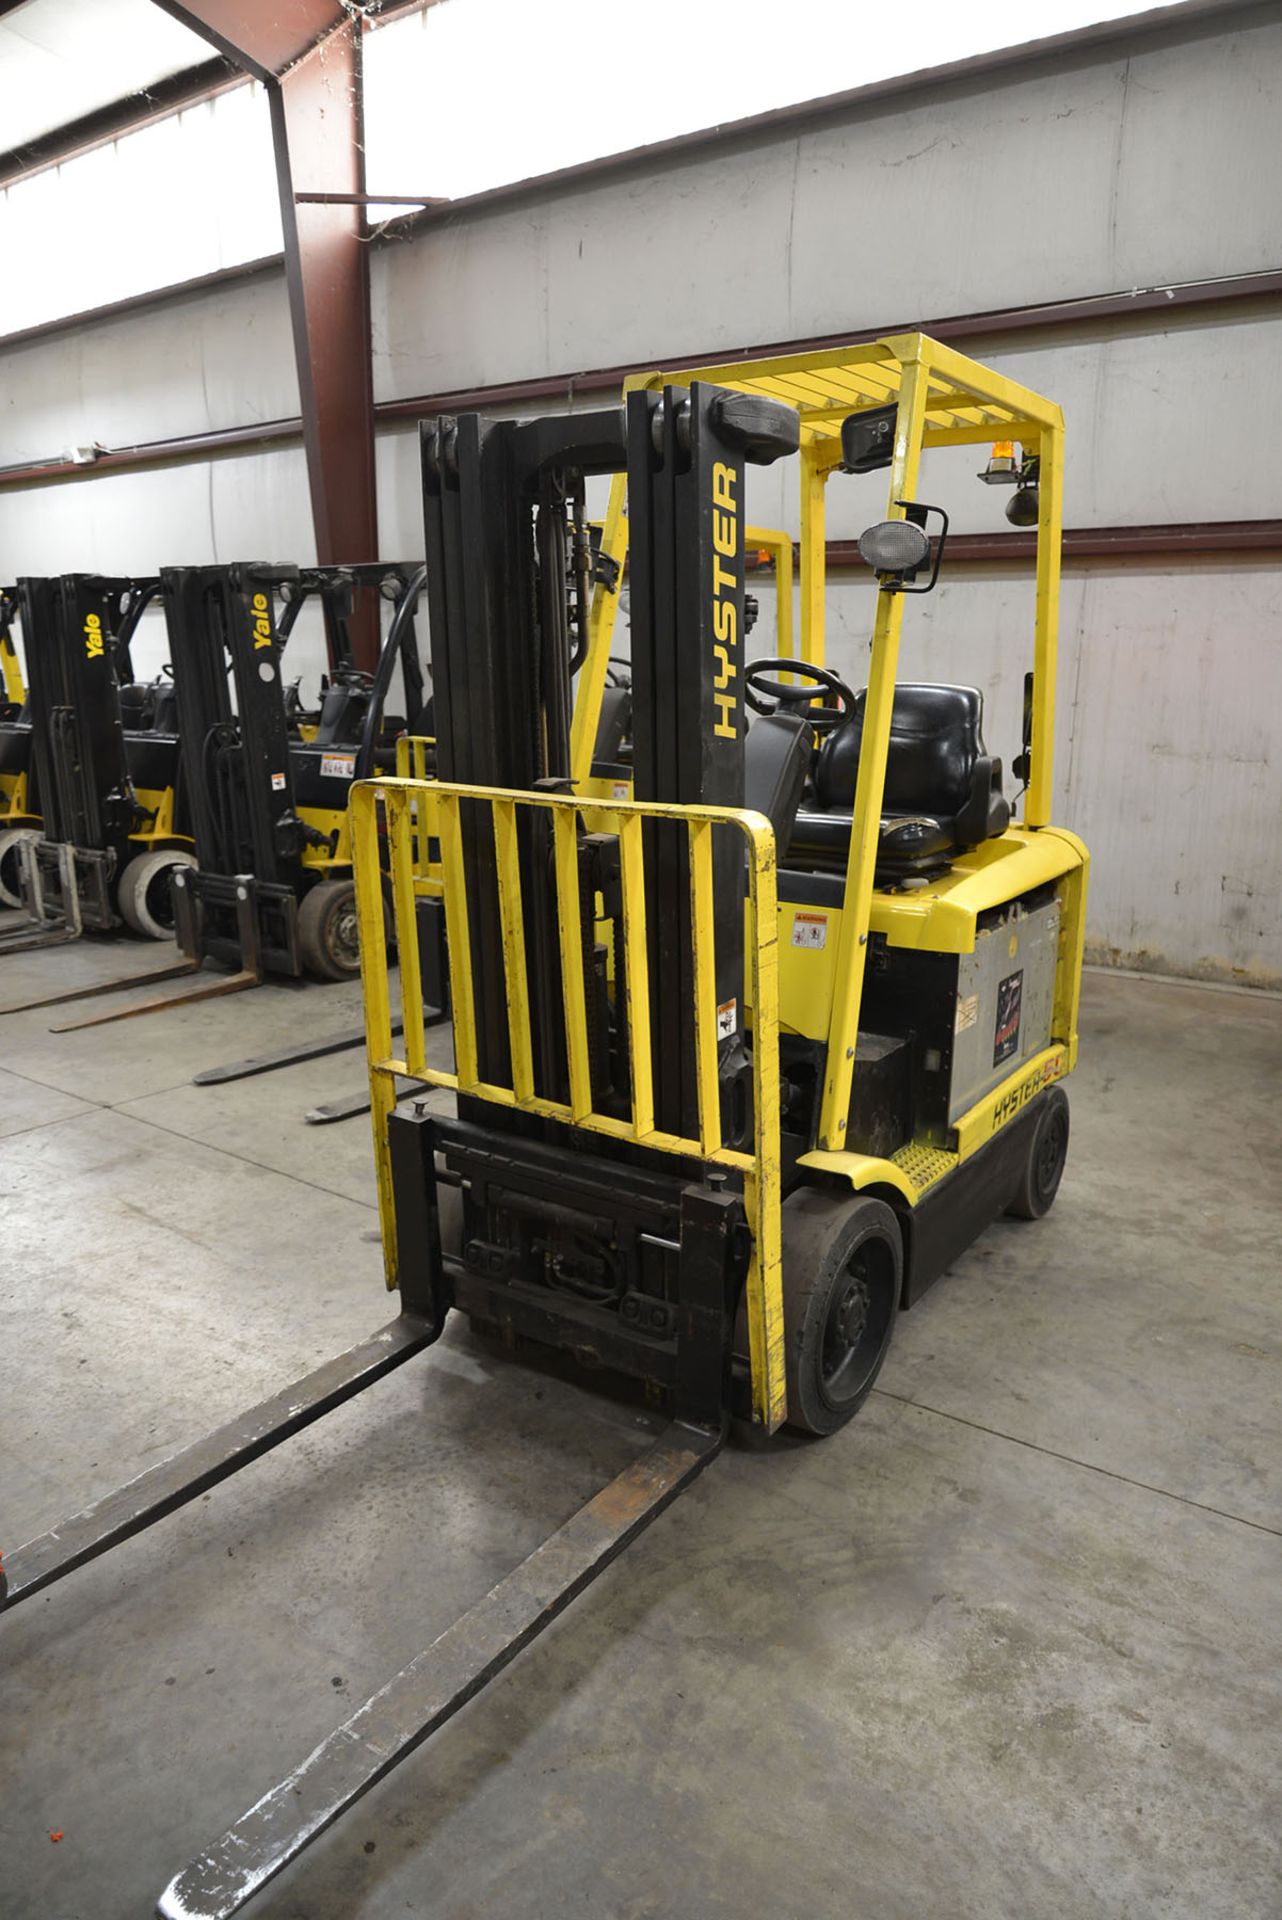 2007 HYSTER 5,500-LB., MODEL: E55Z-33, SN: G108N06319E, 48V ELECTRIC, SOLID TIRES, MONOTROL, 3-STAGE - Image 2 of 6